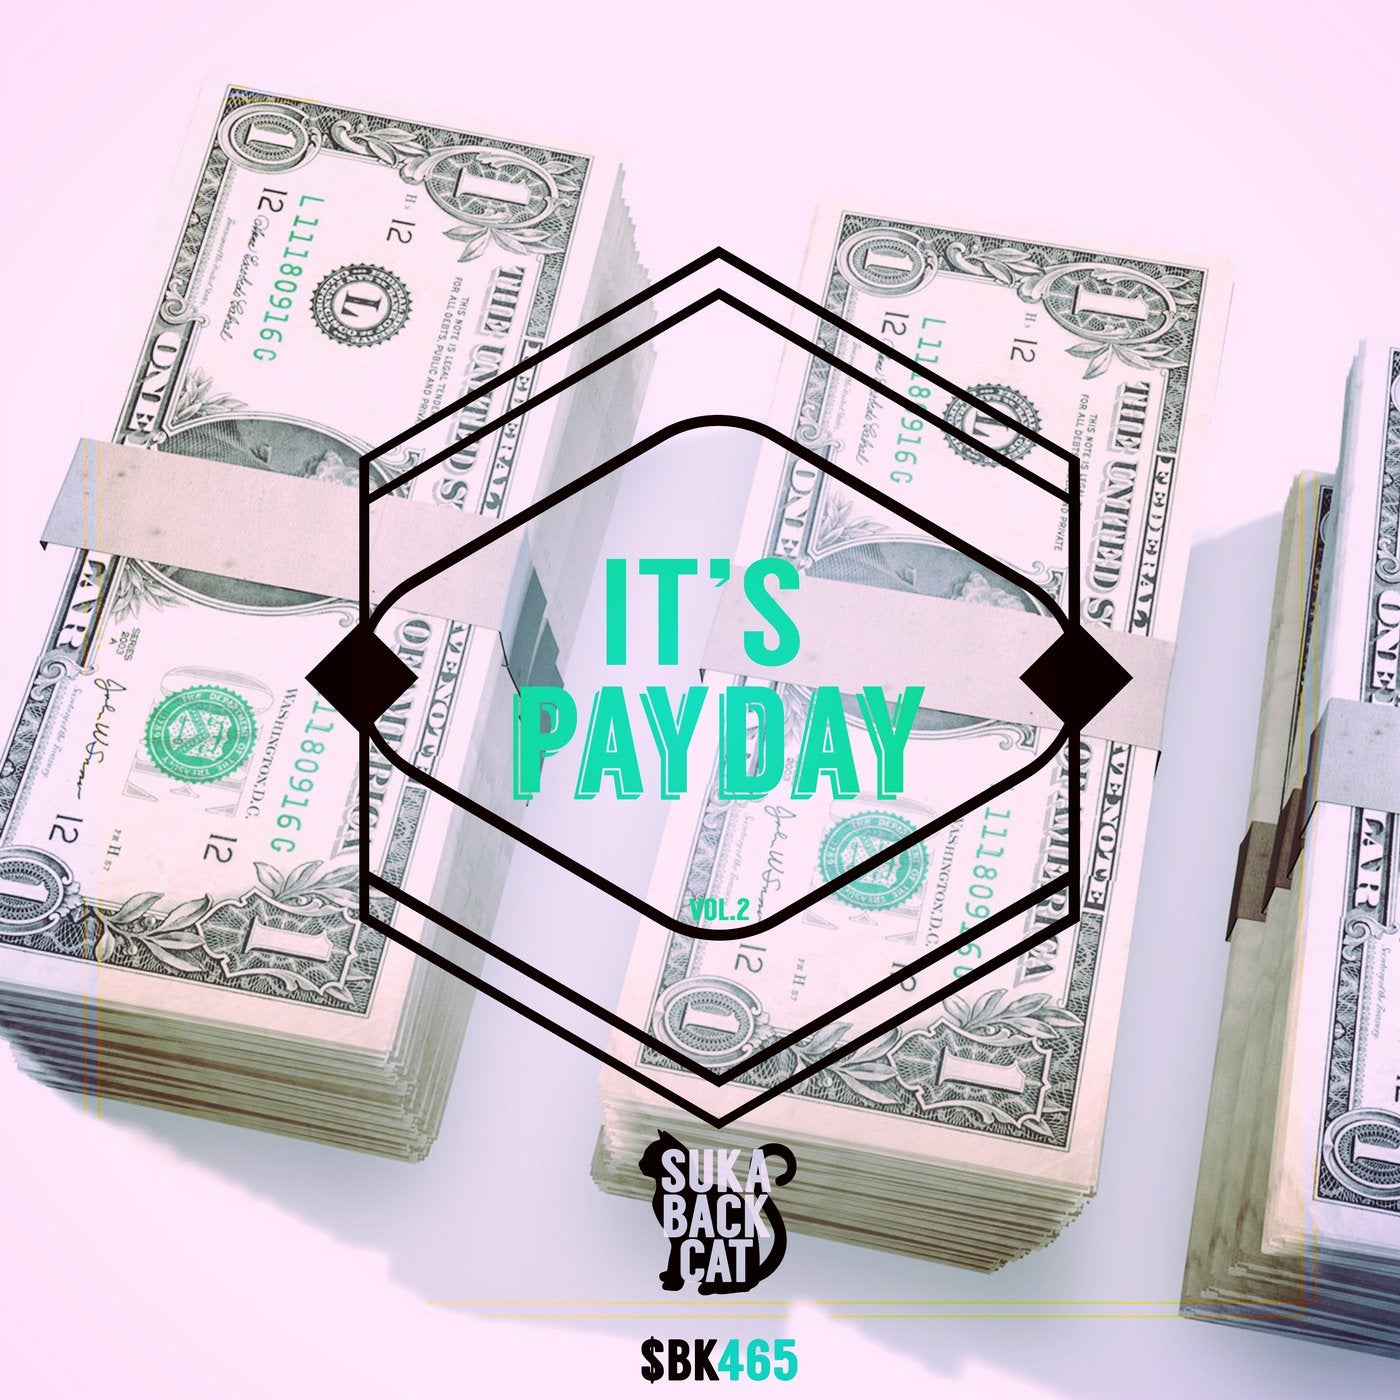 It's Payday, Vol. 2